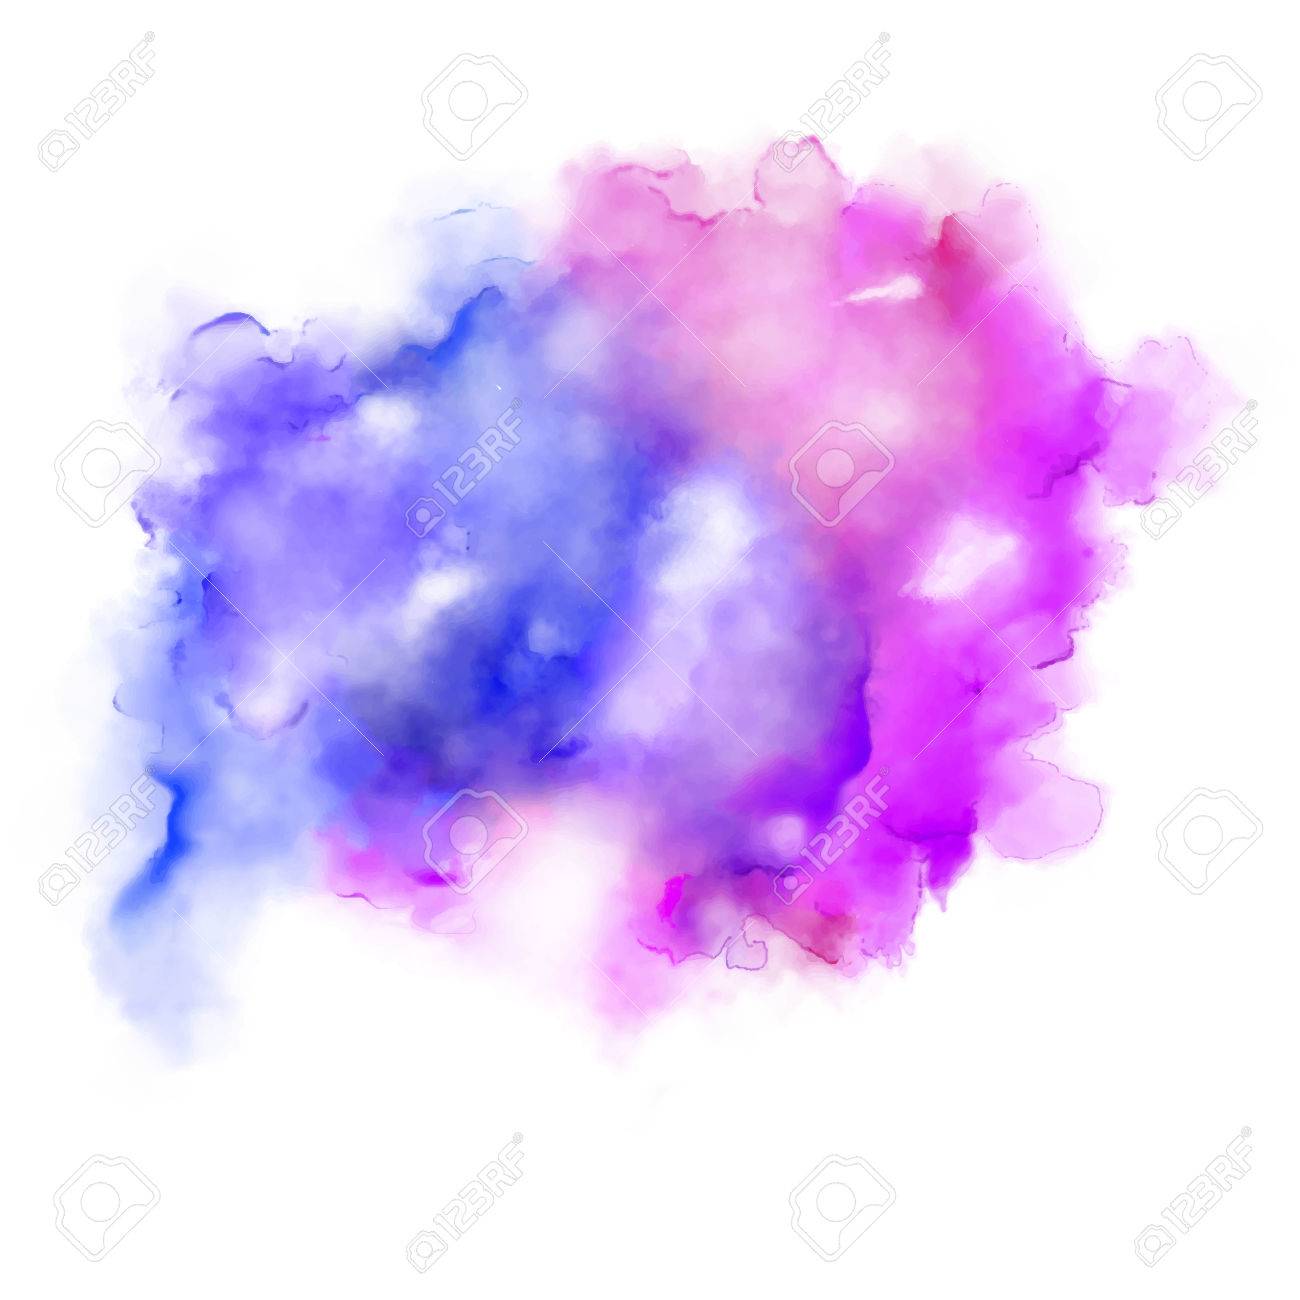 Illustration Of Abstract Colorful Watercolor Background For